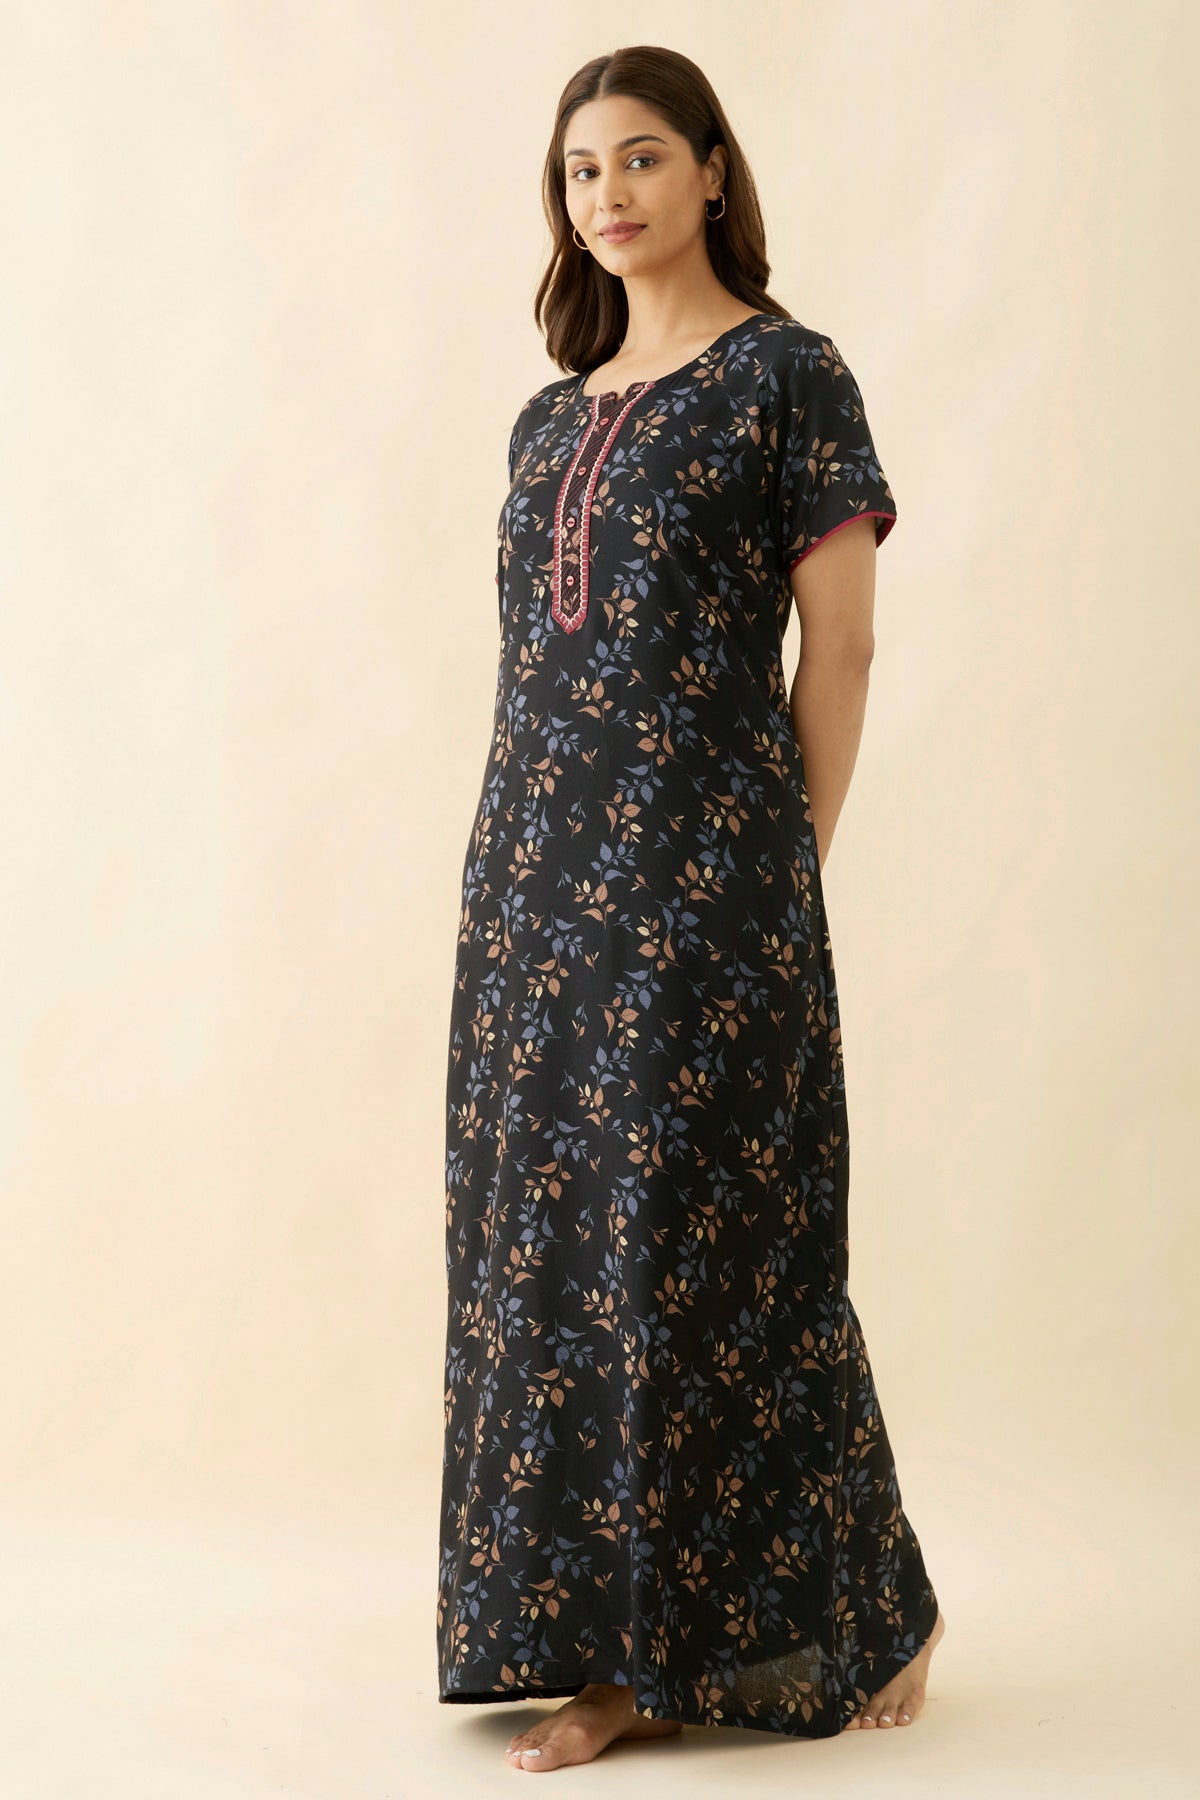 Allover Leaf Printed With Embroidered Yoke - Black